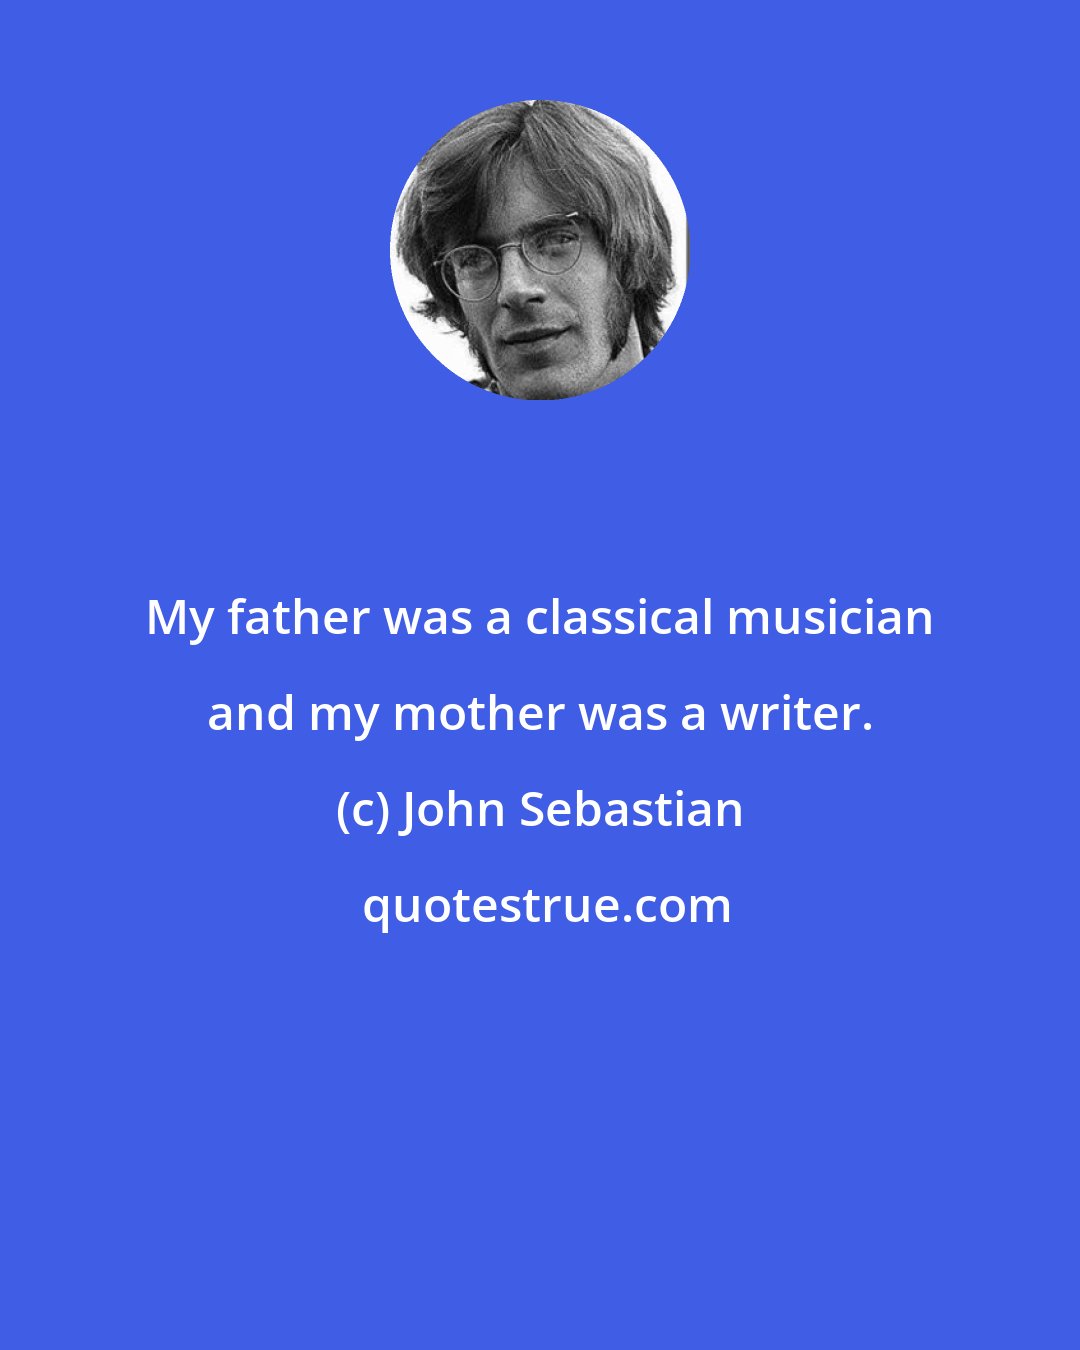 John Sebastian: My father was a classical musician and my mother was a writer.